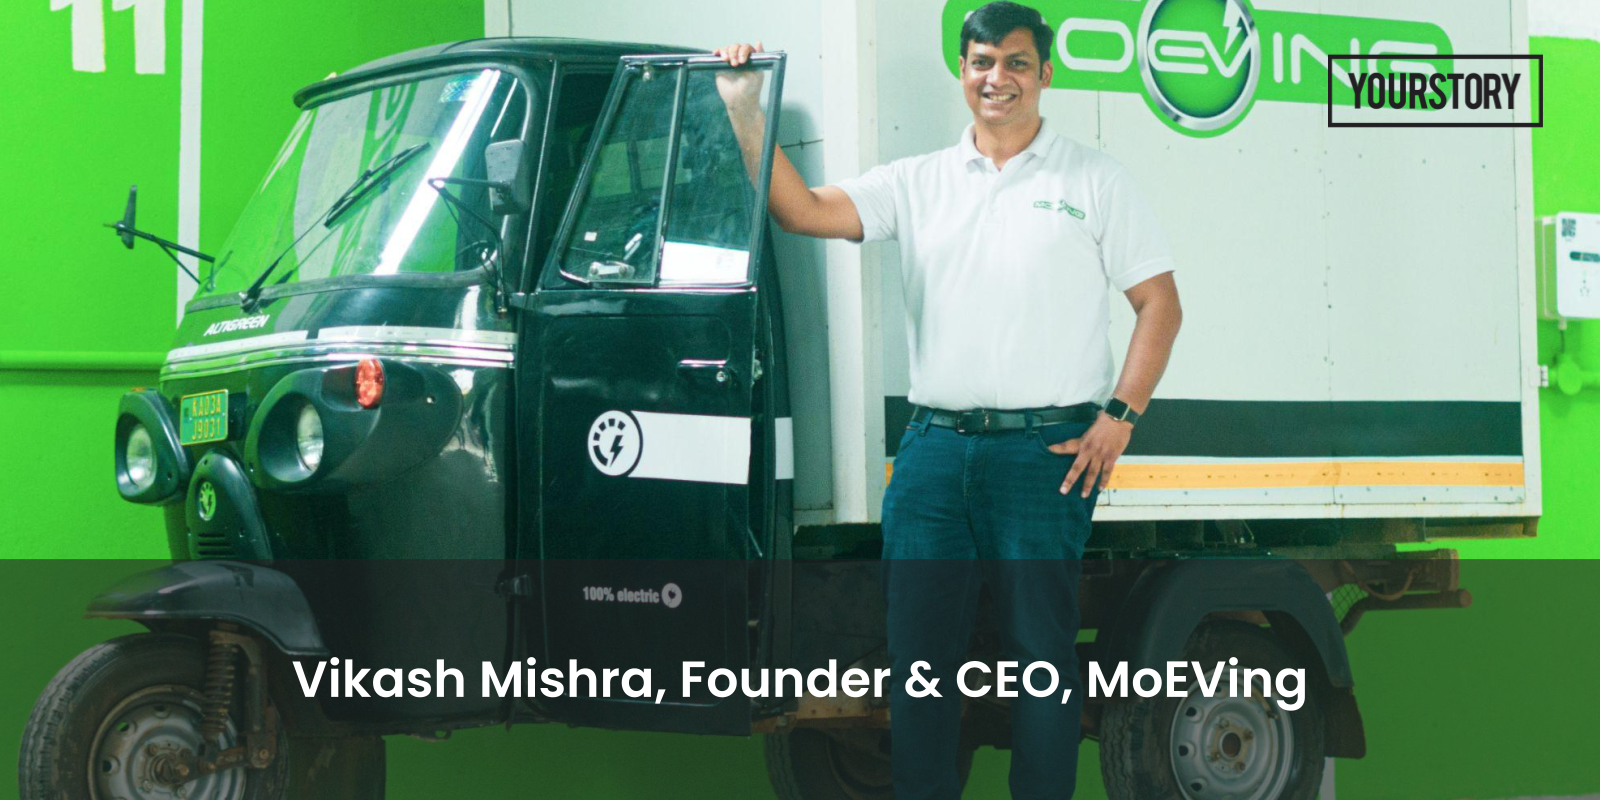 [Funding alert] MoEVing closes $5M in seed capital from angels to fuel growth